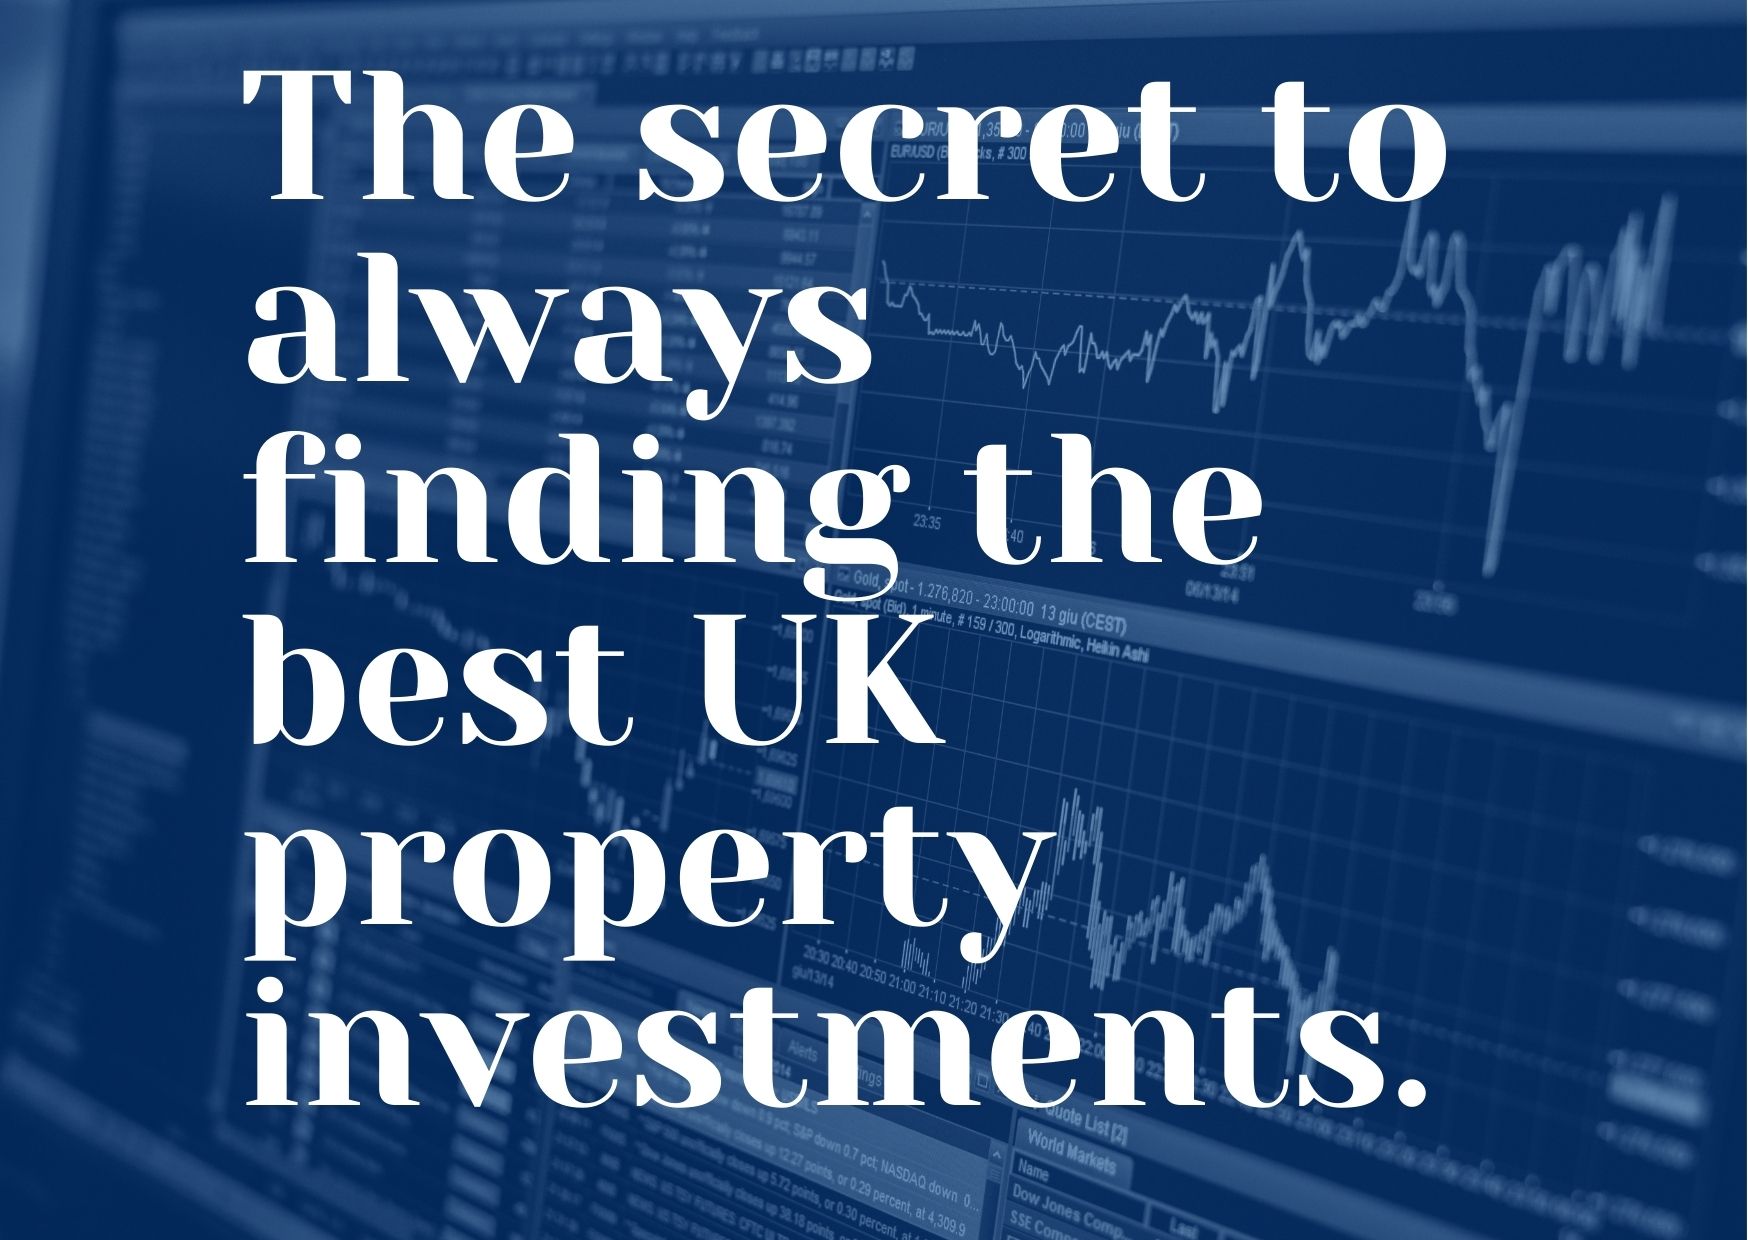 How Do I Pick A Property In England? / The Secret To Always Finding The Best UK Property Investments.